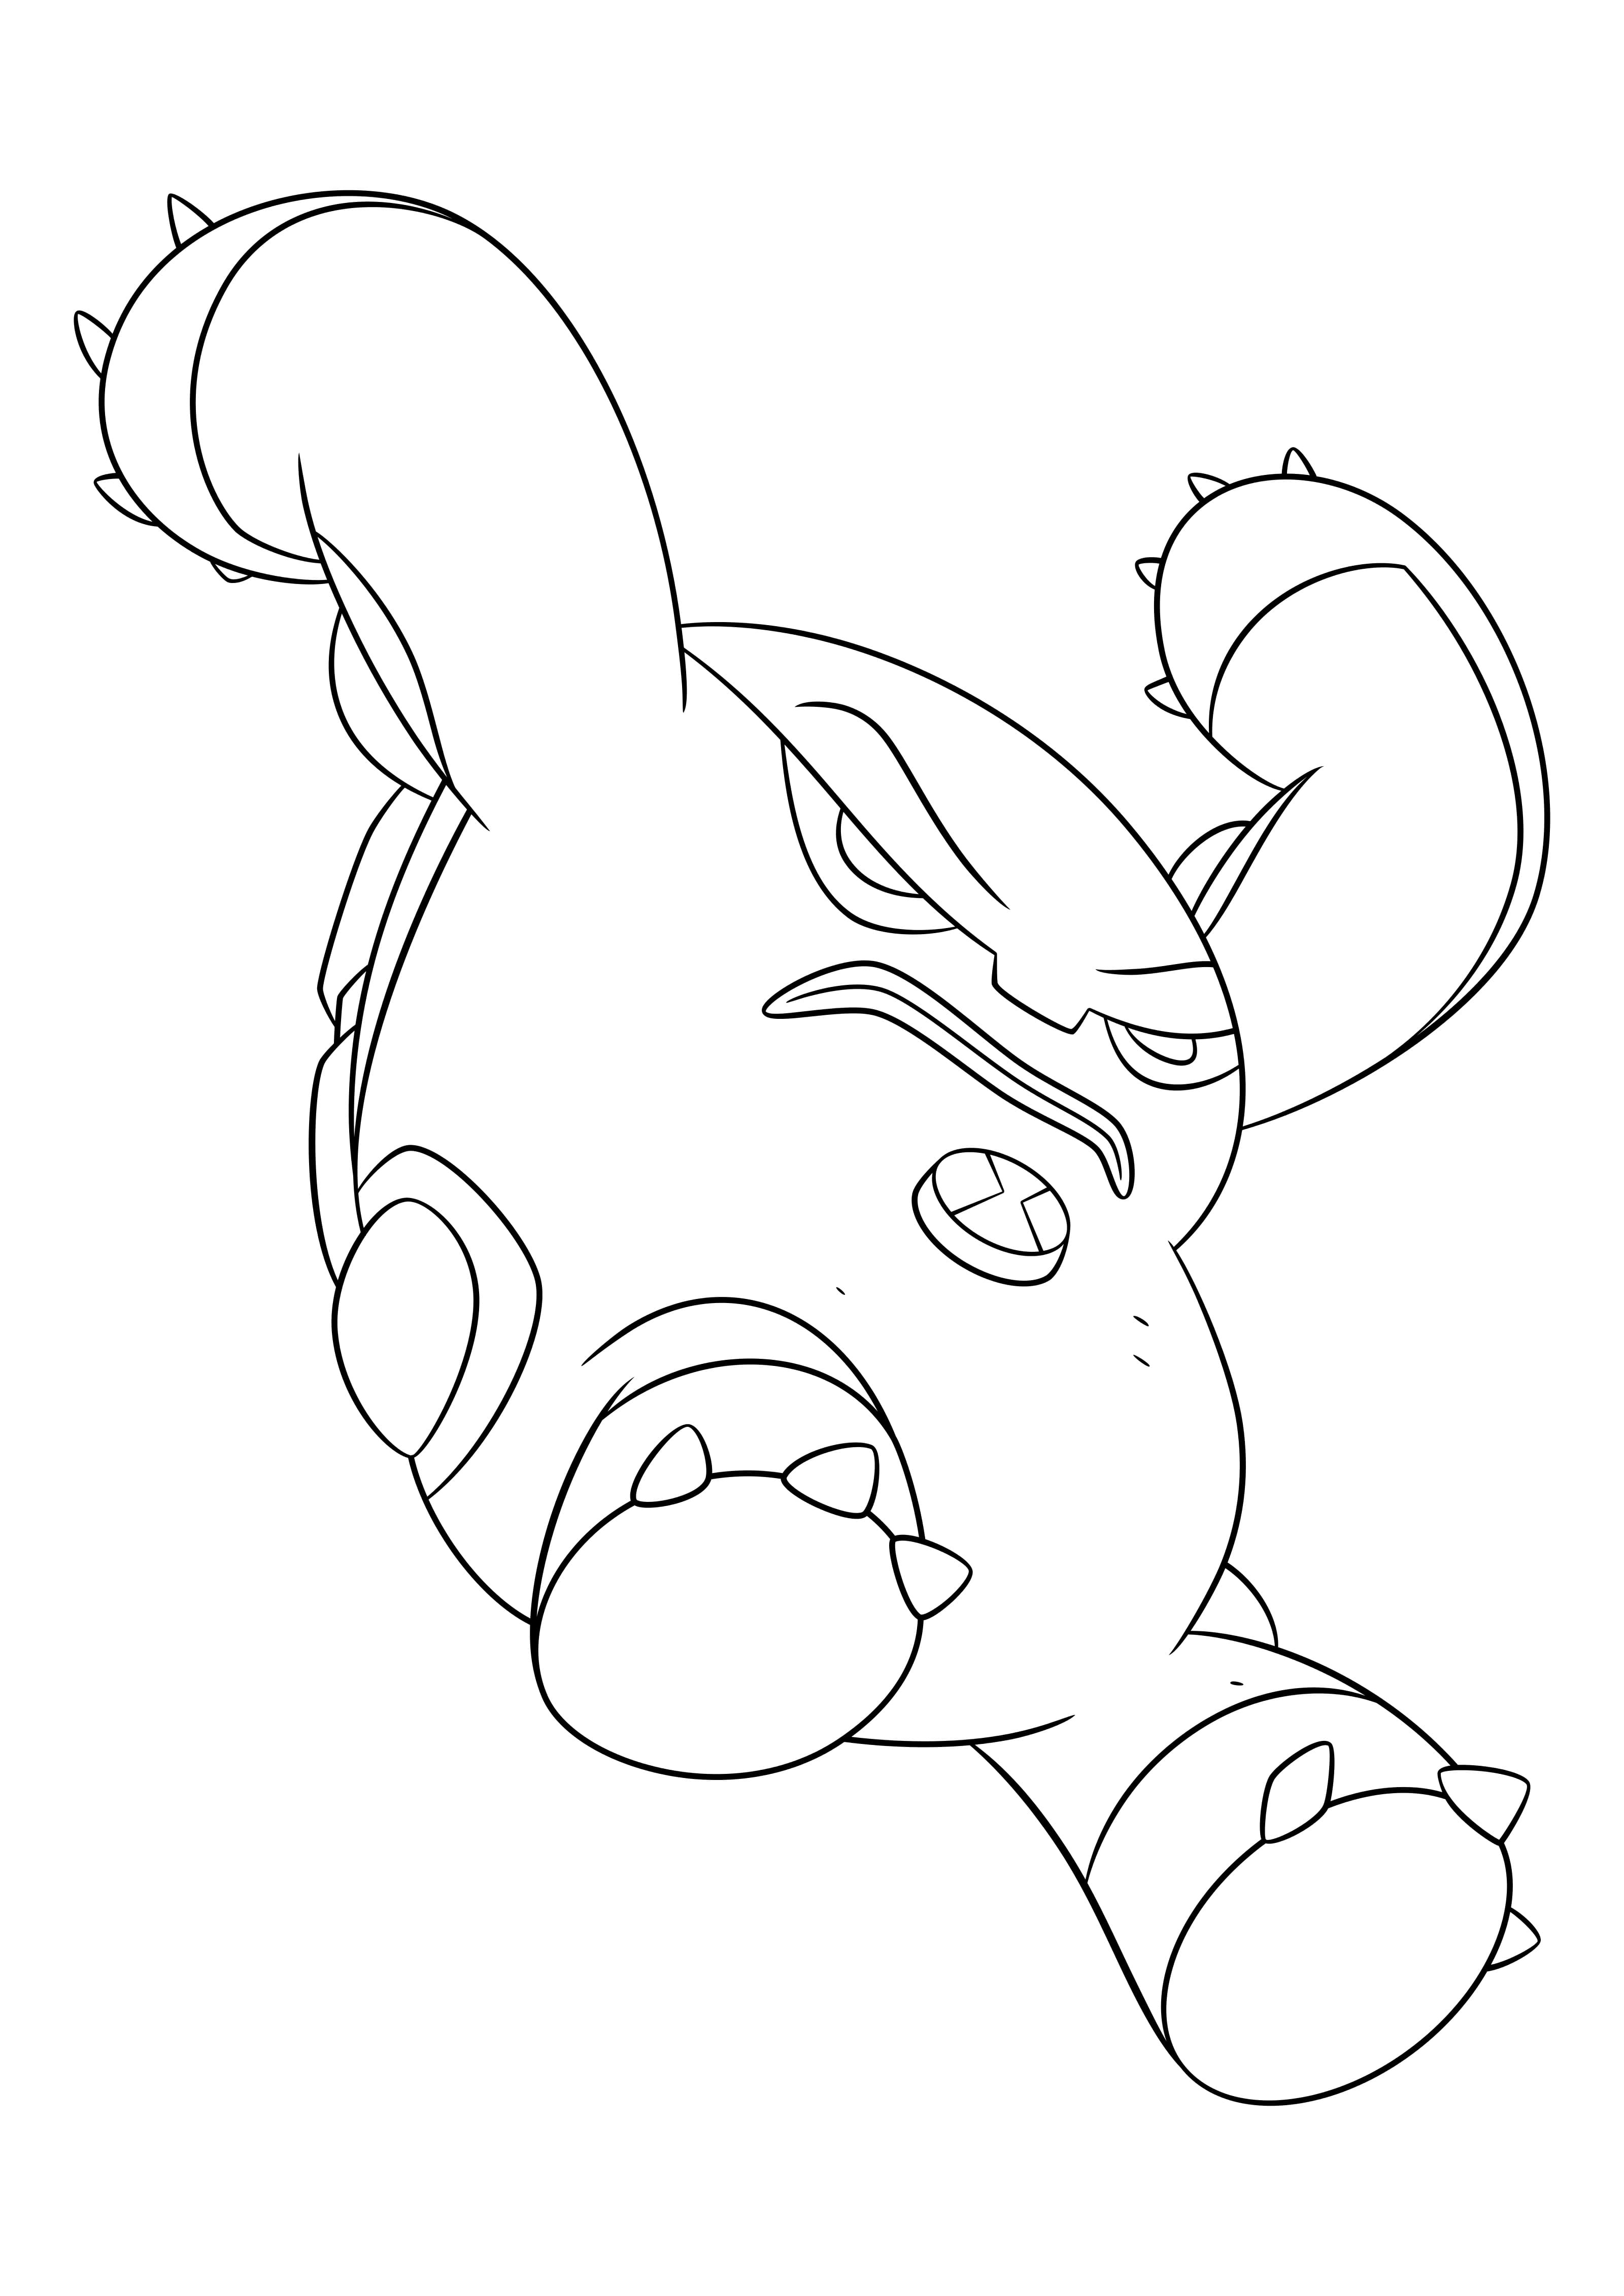 coloring-pages-raskrasil-ben-coloring-pages